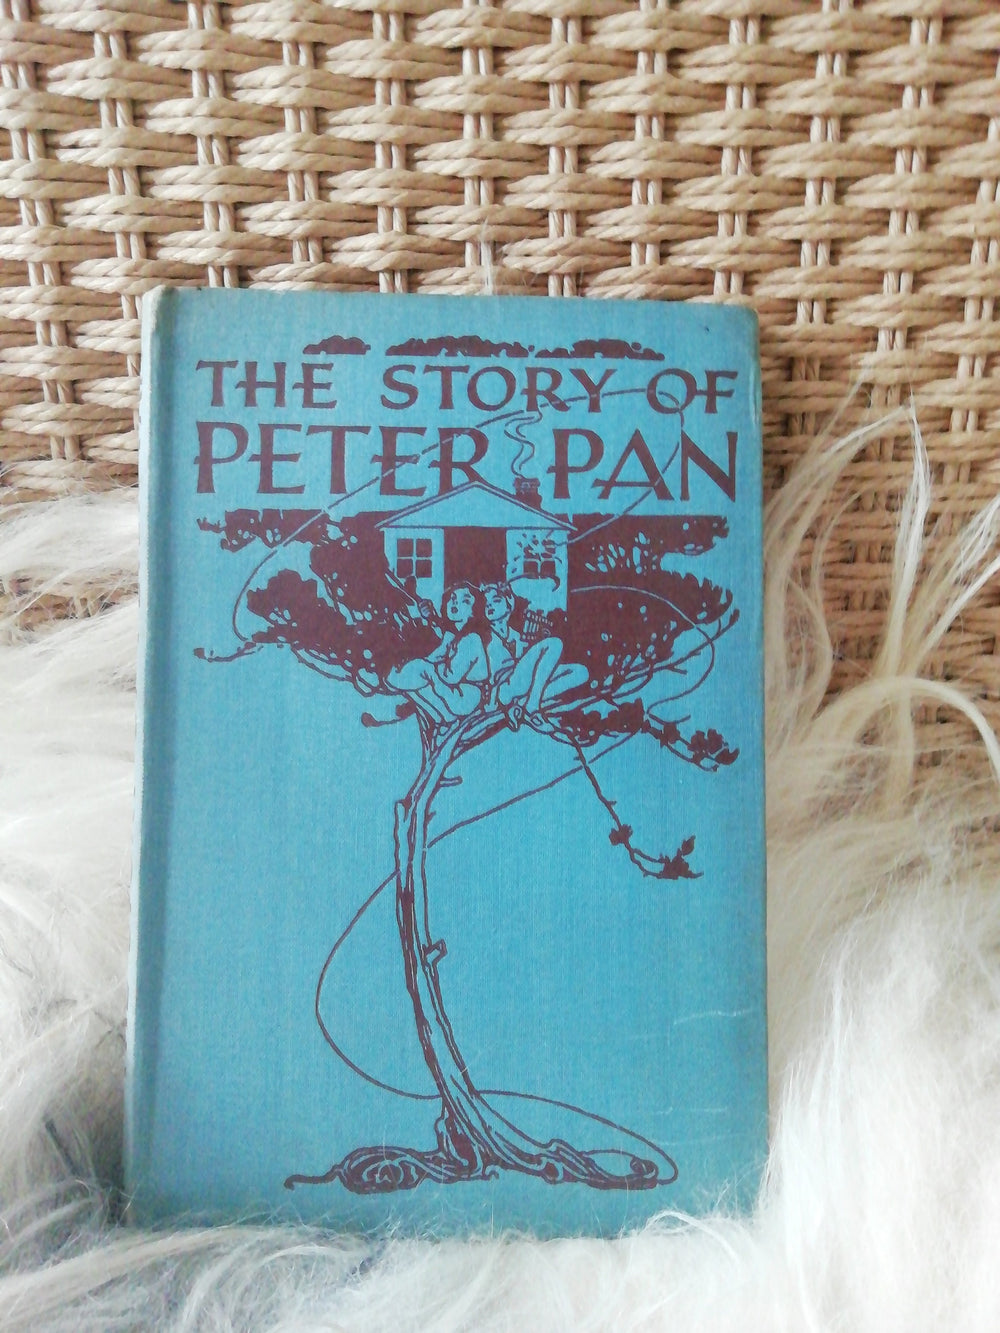 The Story of PETER PAN